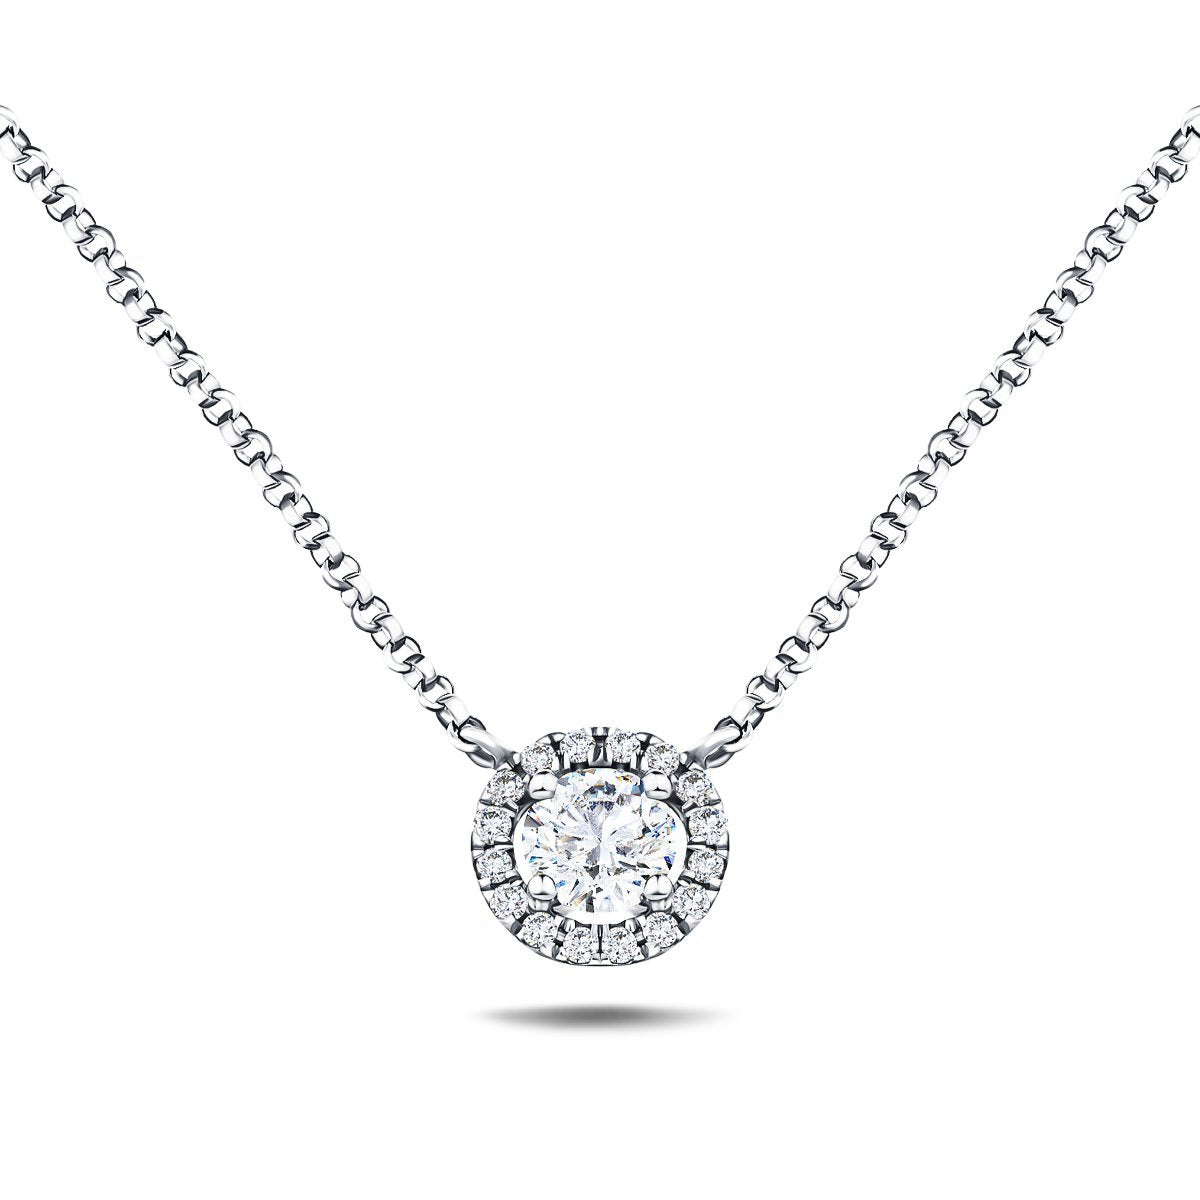 Diamond Halo Pendant Necklace 0.15ct G/SI Quality in 18k White Gold - All Diamond